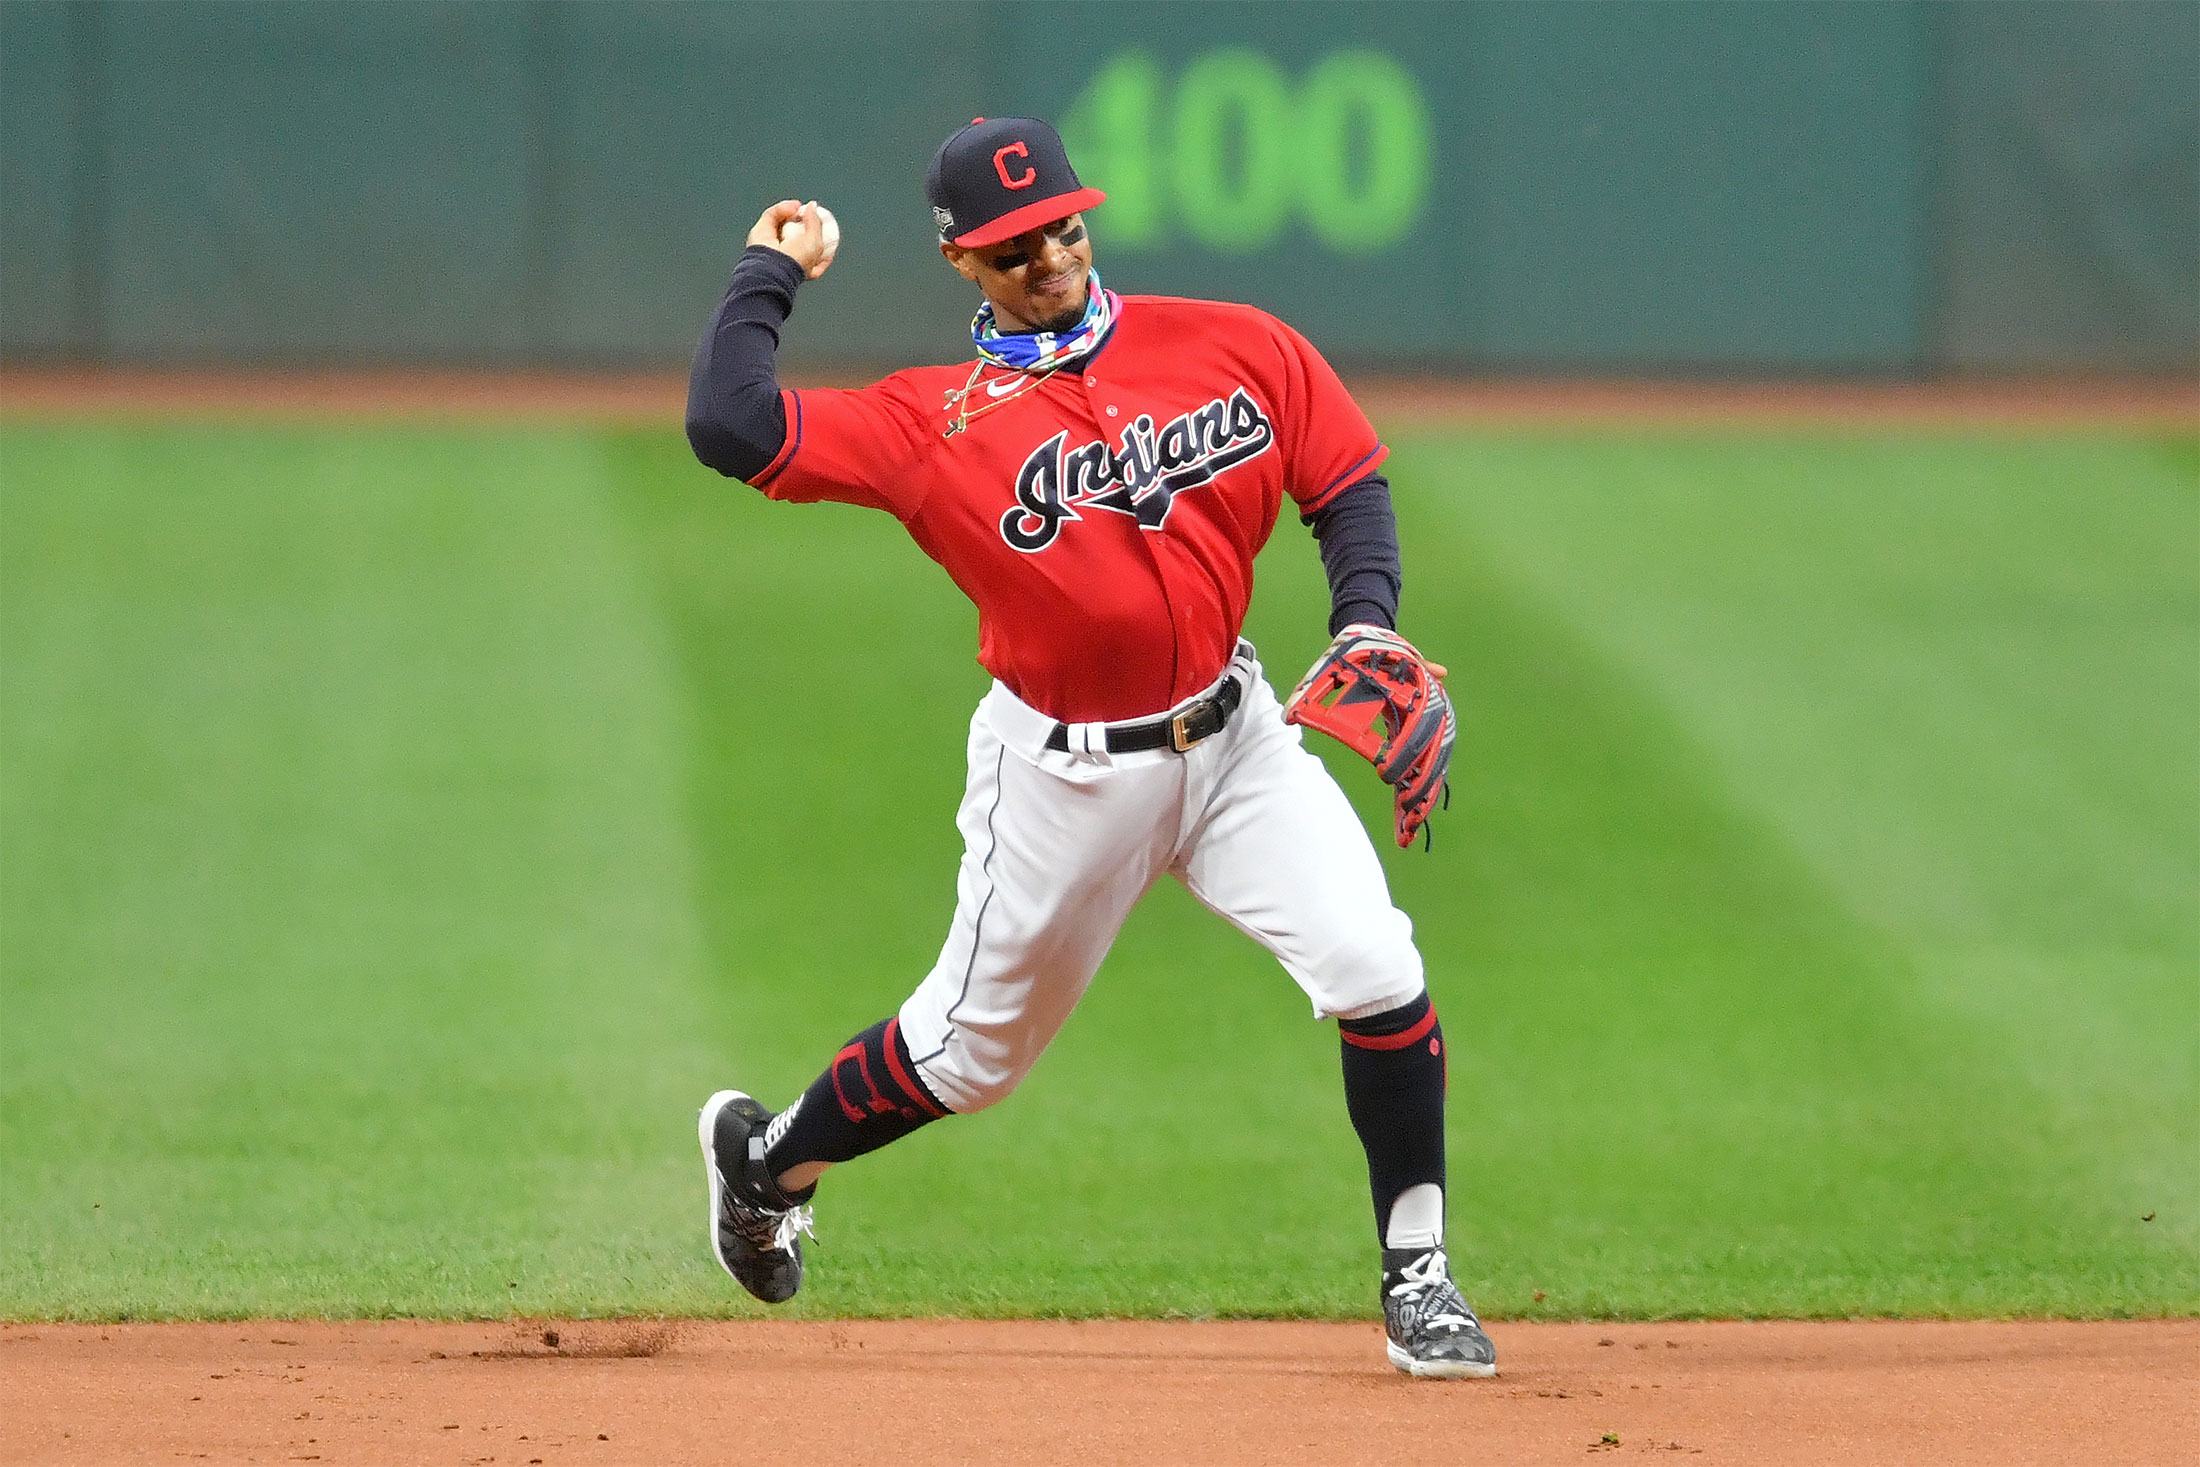 Francisco Lindor has some of the most swag in the game